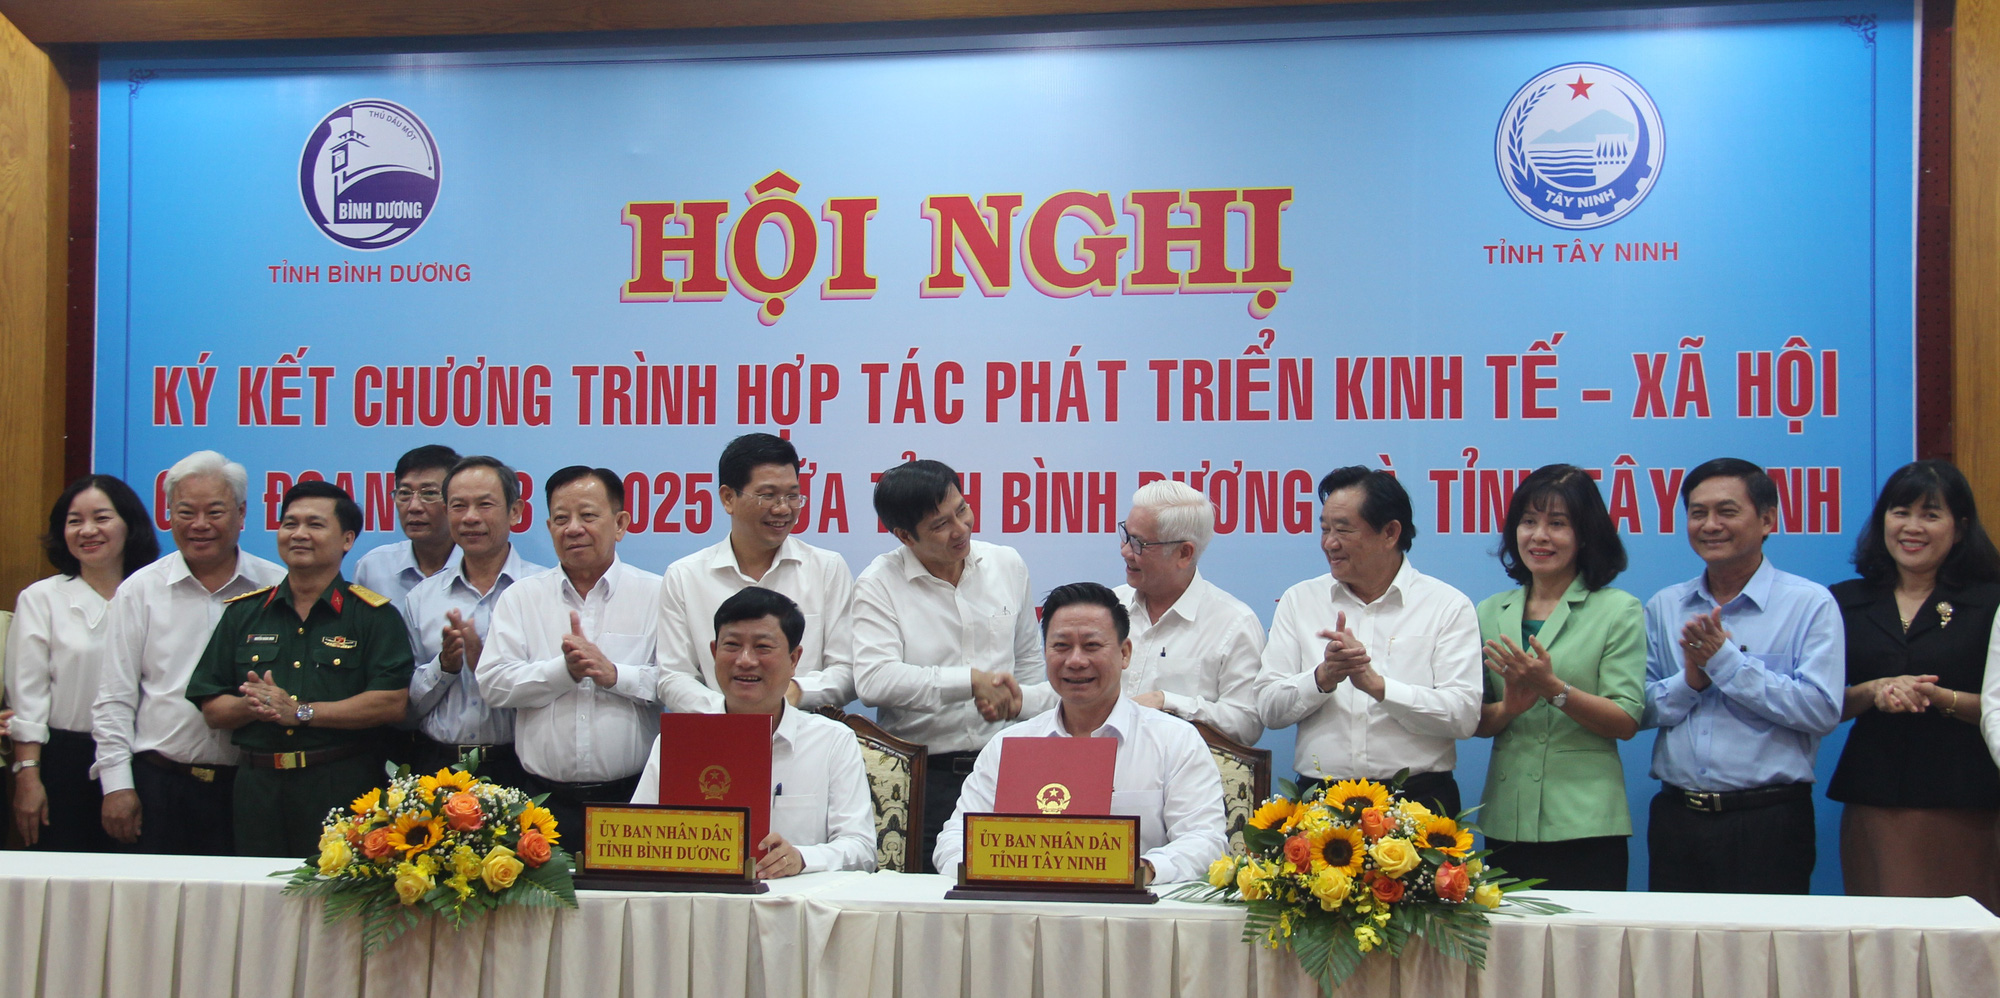 Leaders of Tay Ninh and Binh Duong Provinces sign an agreement to work together on multiple projects at a conference held in Tay Ninh Province, southern Vietnam, May 12, 2023. Photo: Ba Son / Tuoi Tre